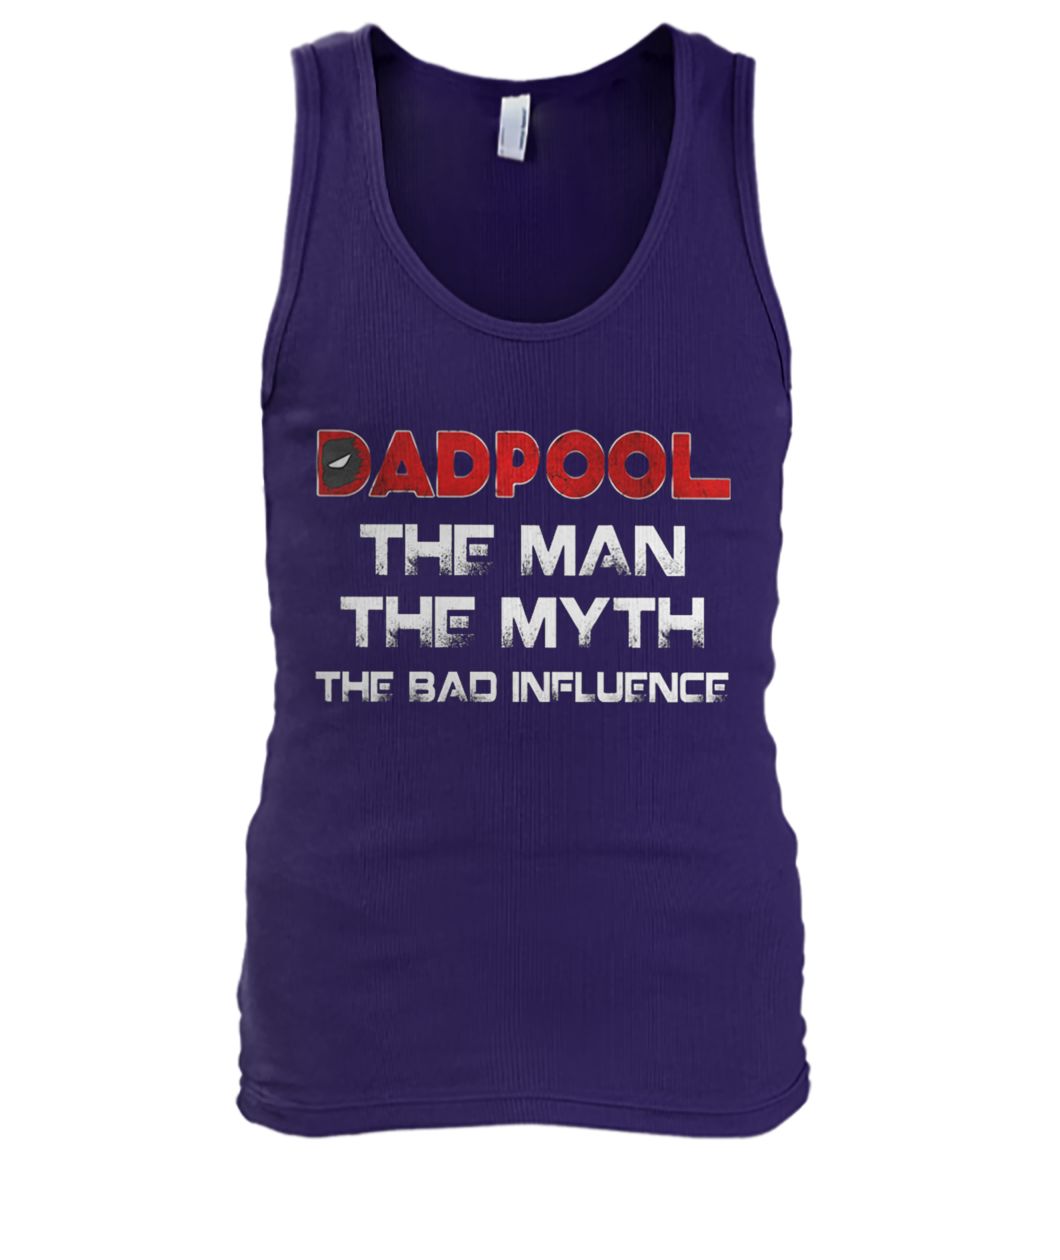 Dadpool the man the myth the bad influence men's tank top